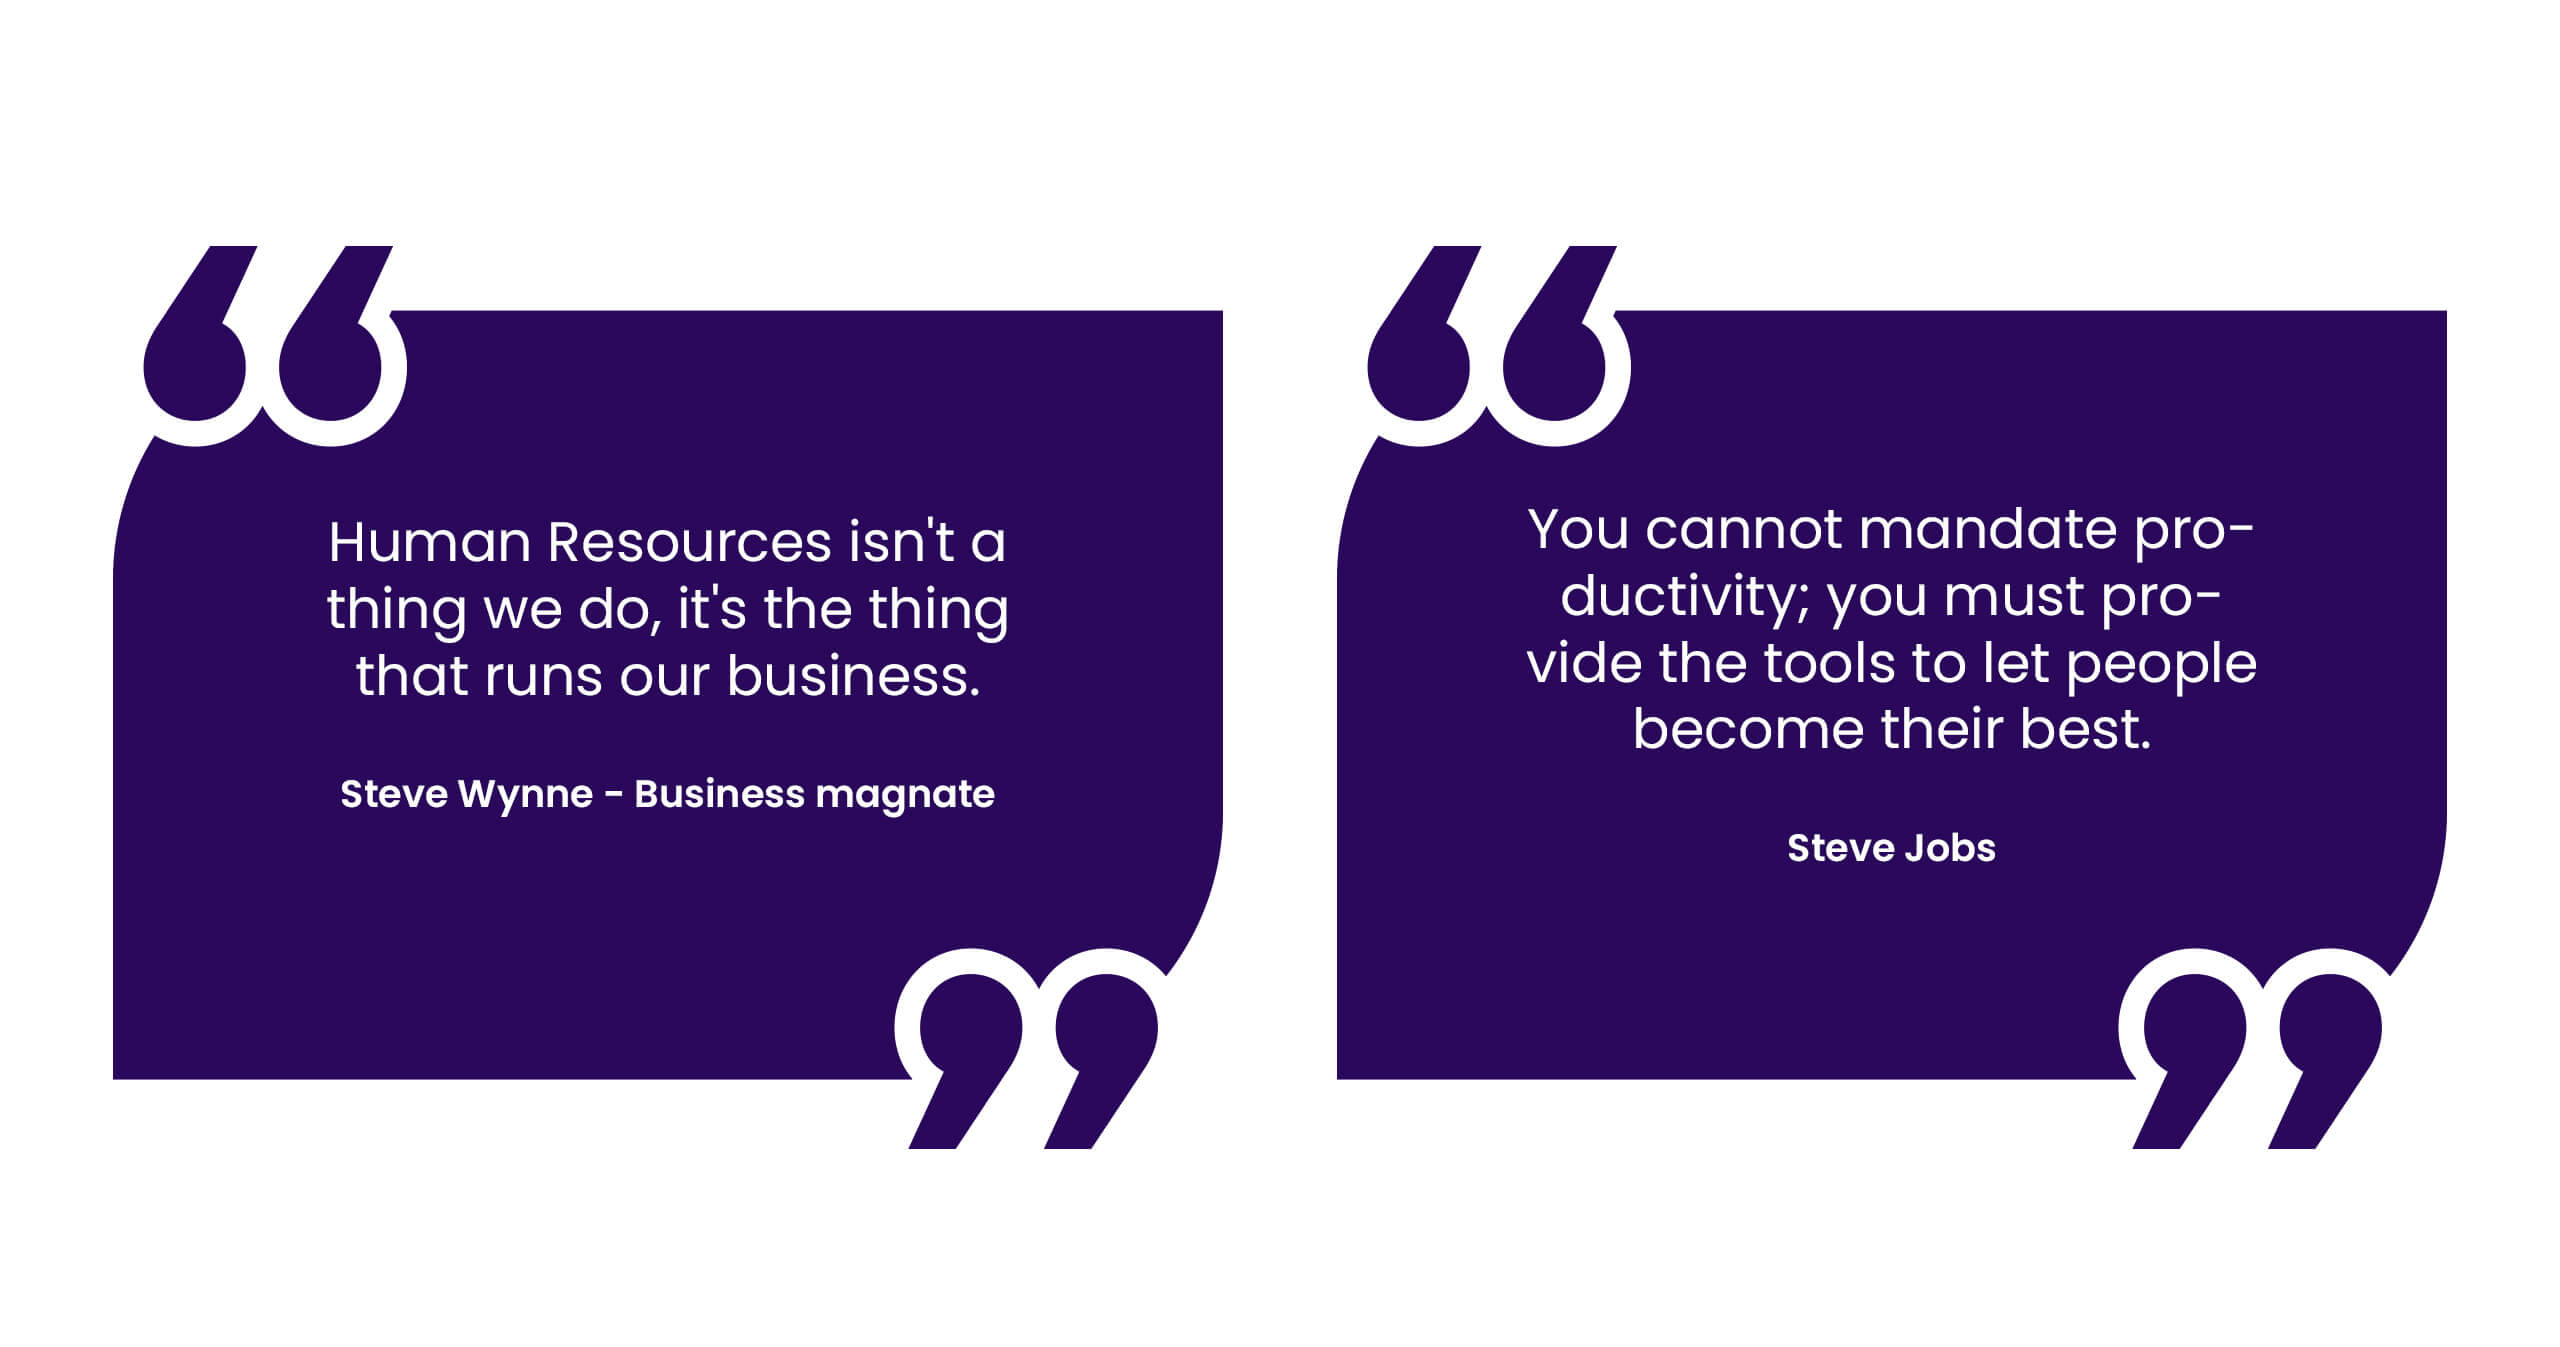 Quotes by Steve Jobs and Steve Wynne